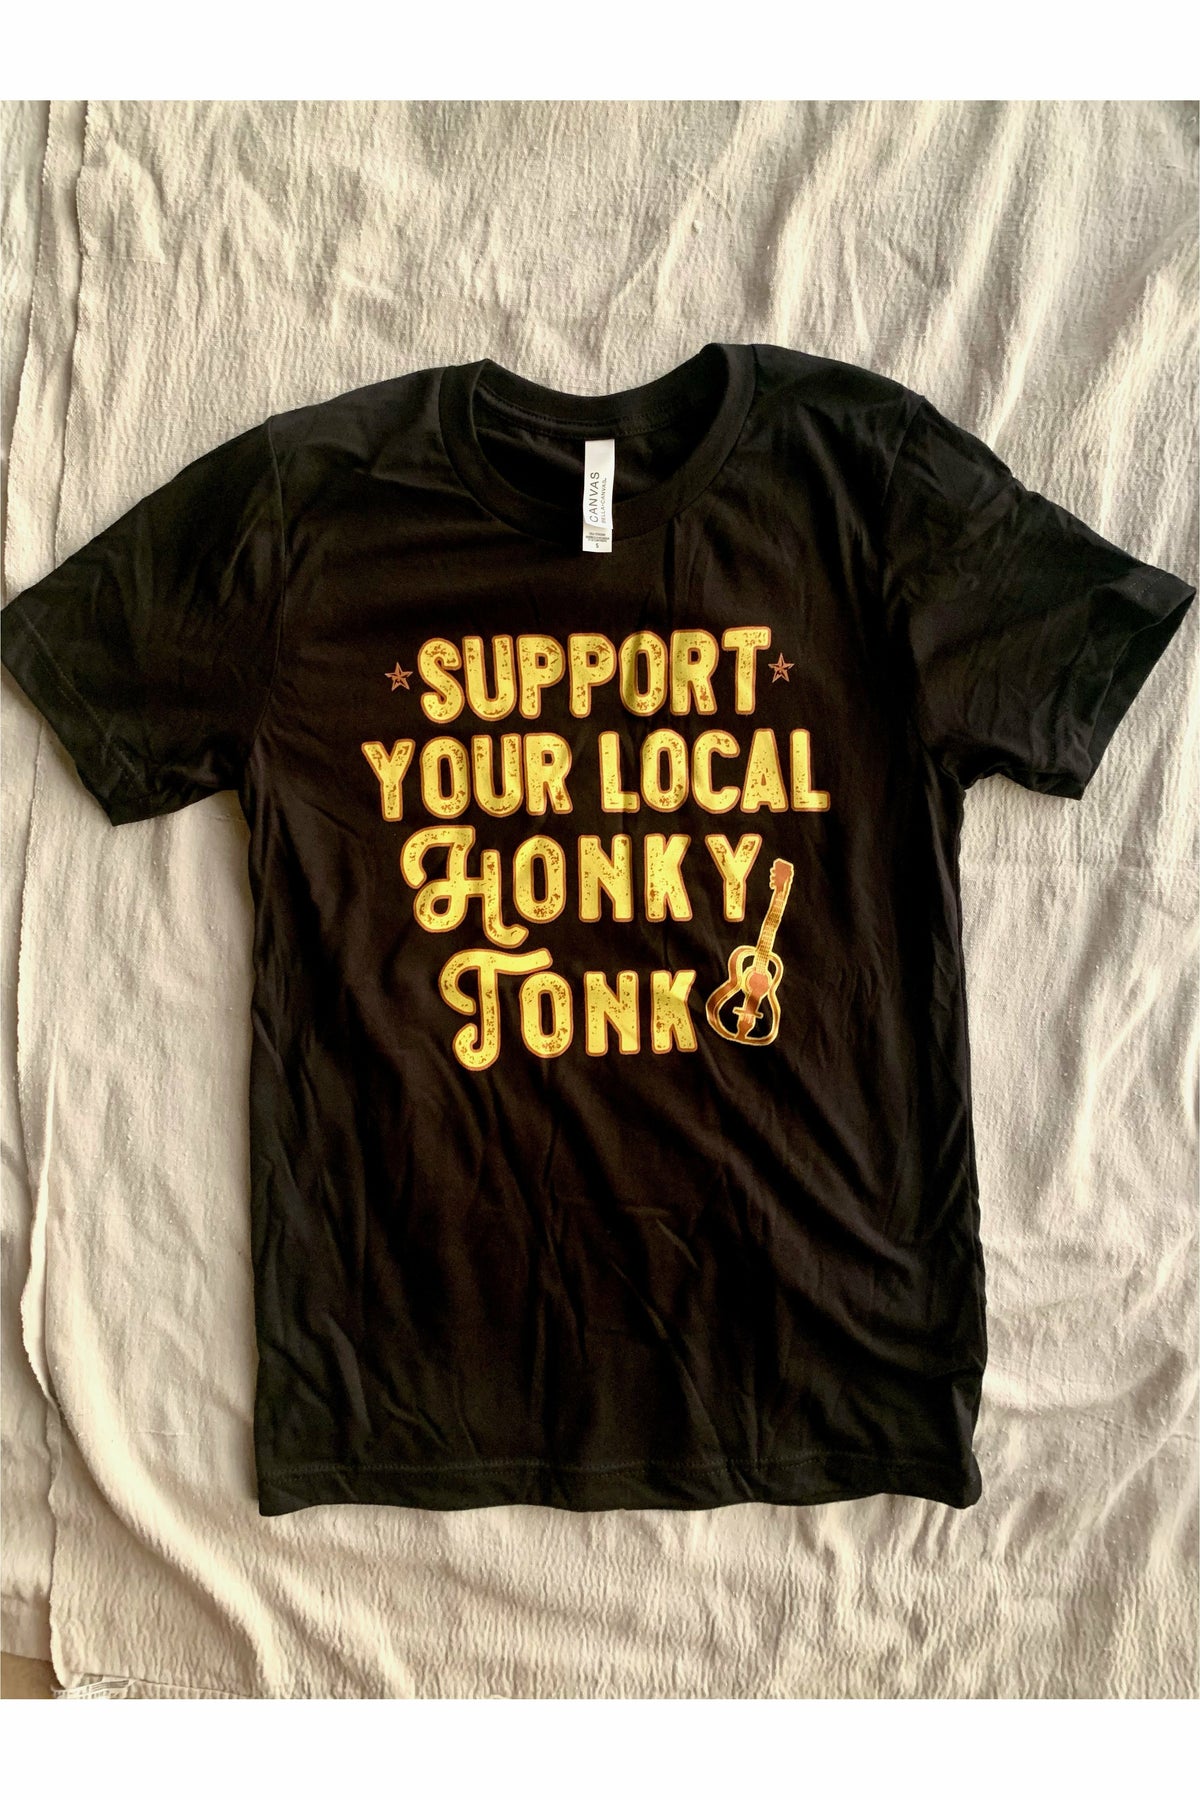 Support your local honky tonk tee